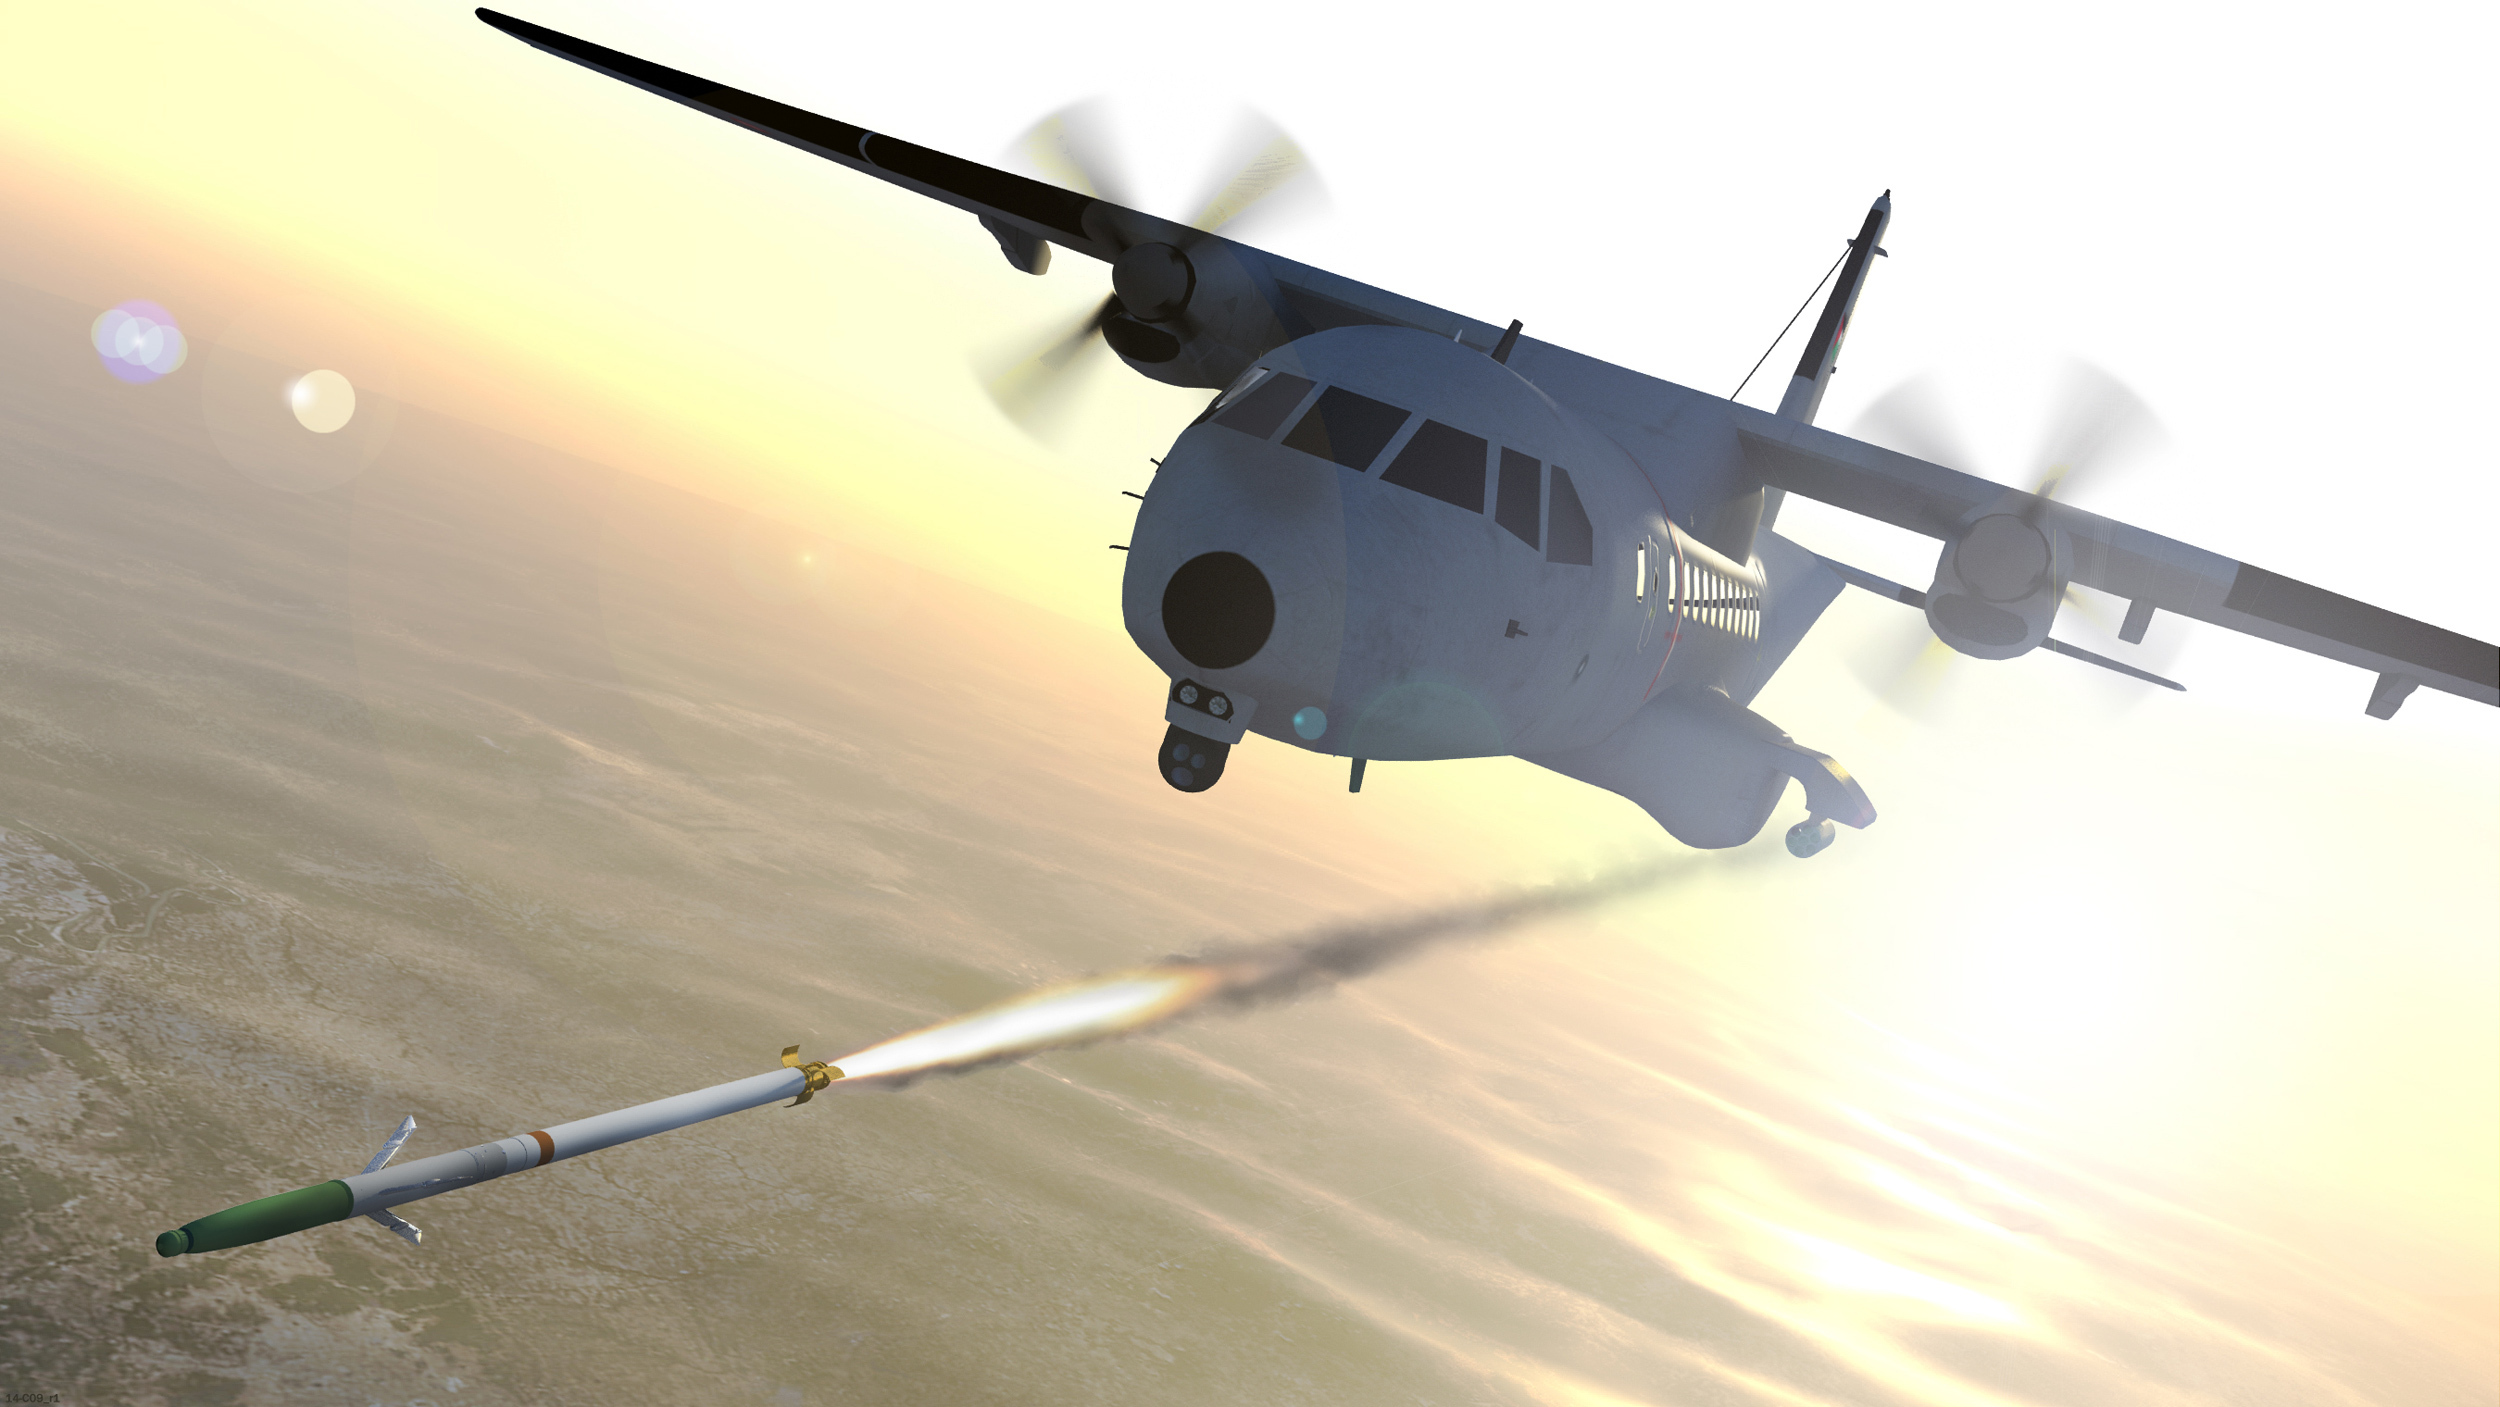 Kingdom Of Jordan To Purchase Bae Systems Precision Rockets To